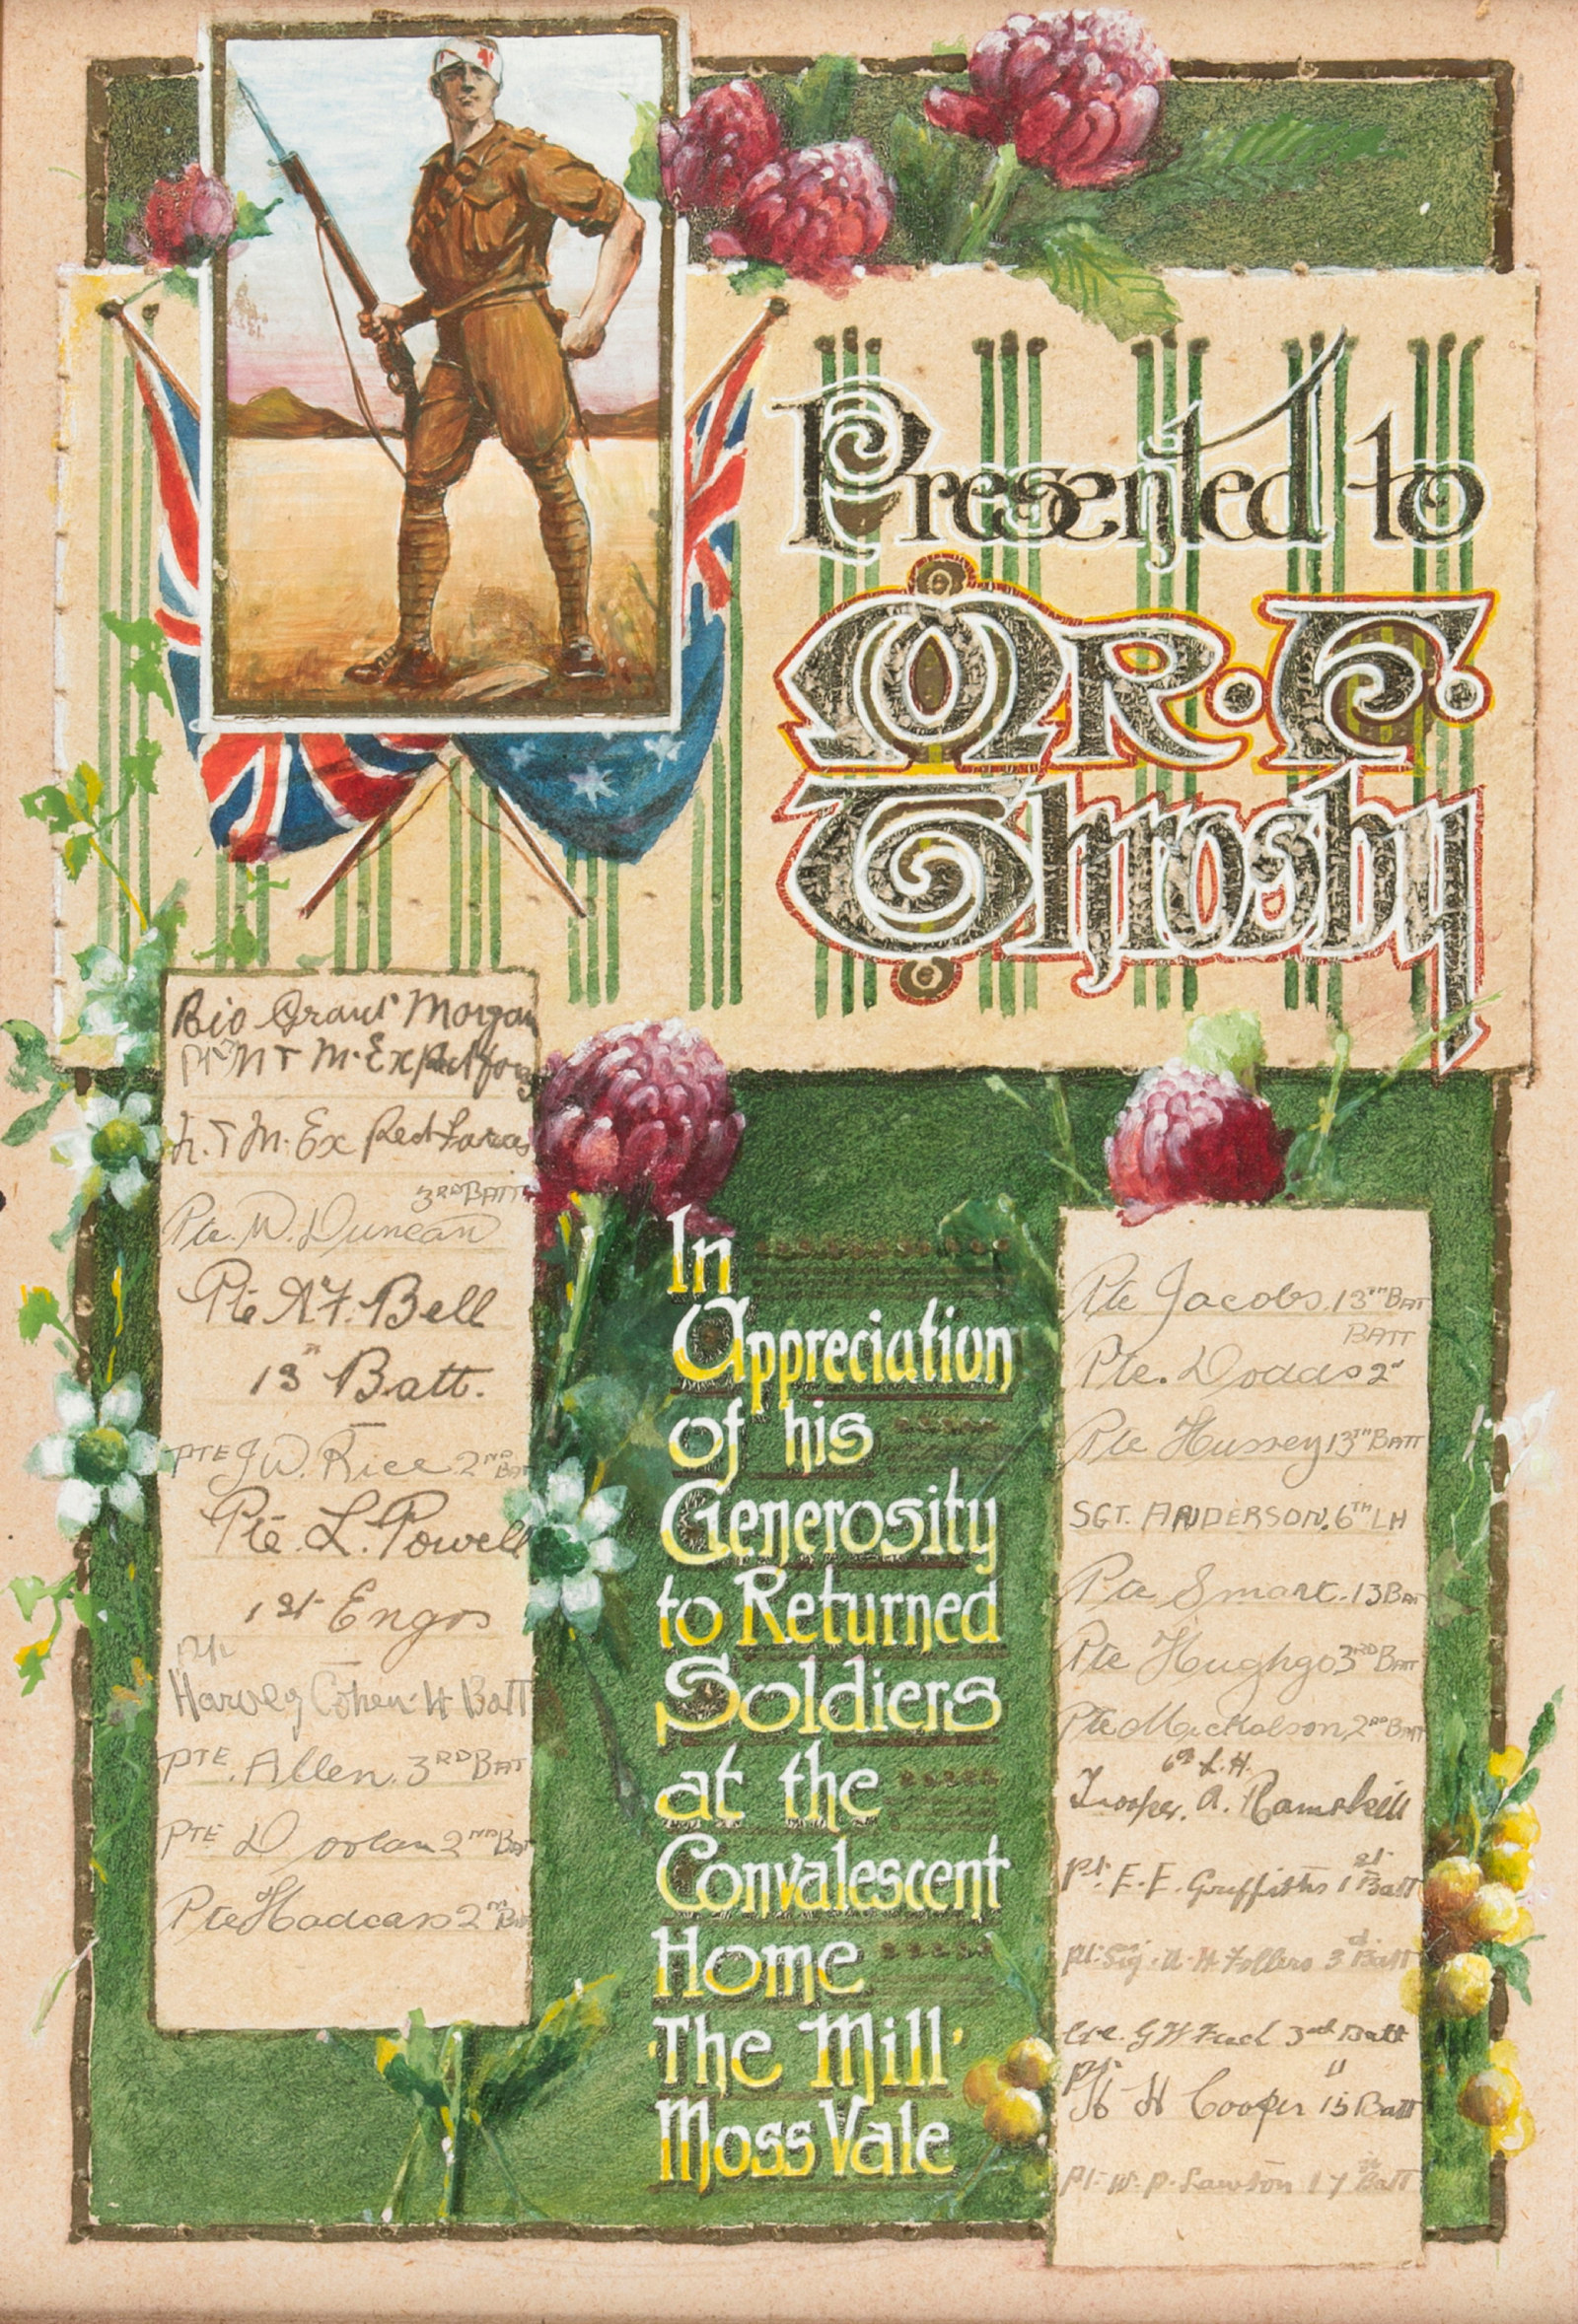 Ornately decorated certificate with colourful imagery and fancy handwriting.